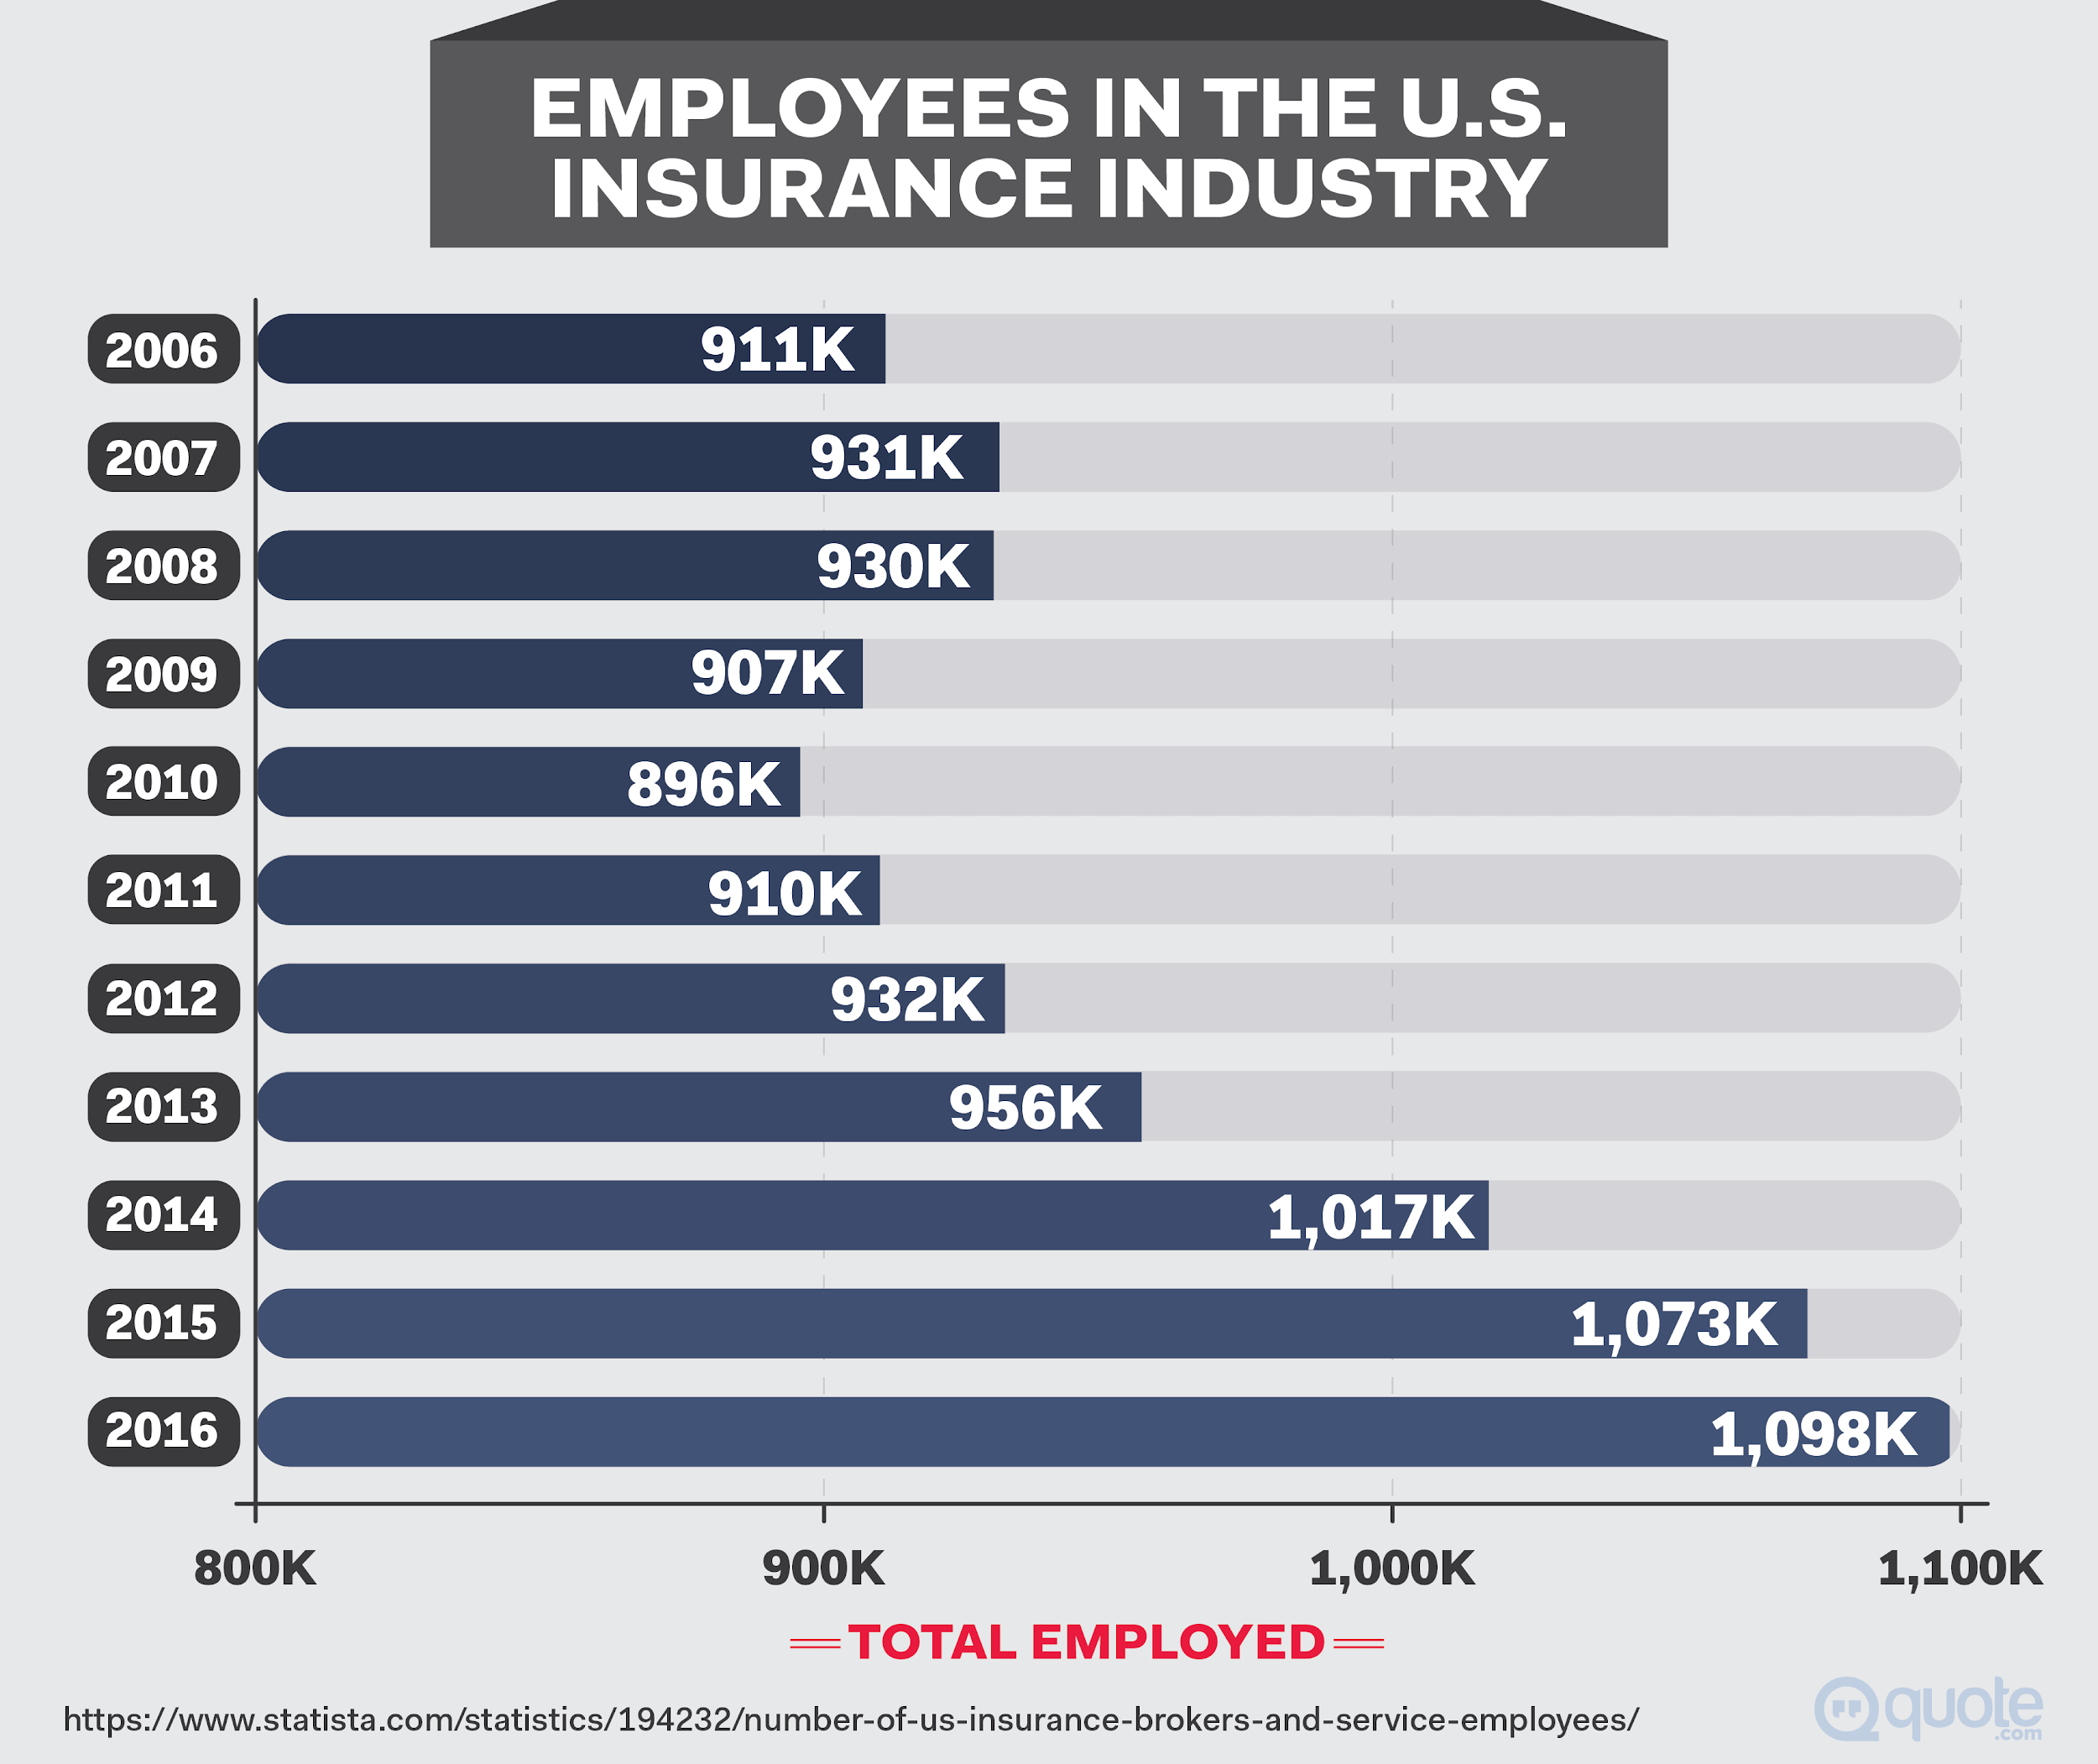 Employees in the U.S. Insurance Industry 2006-2016